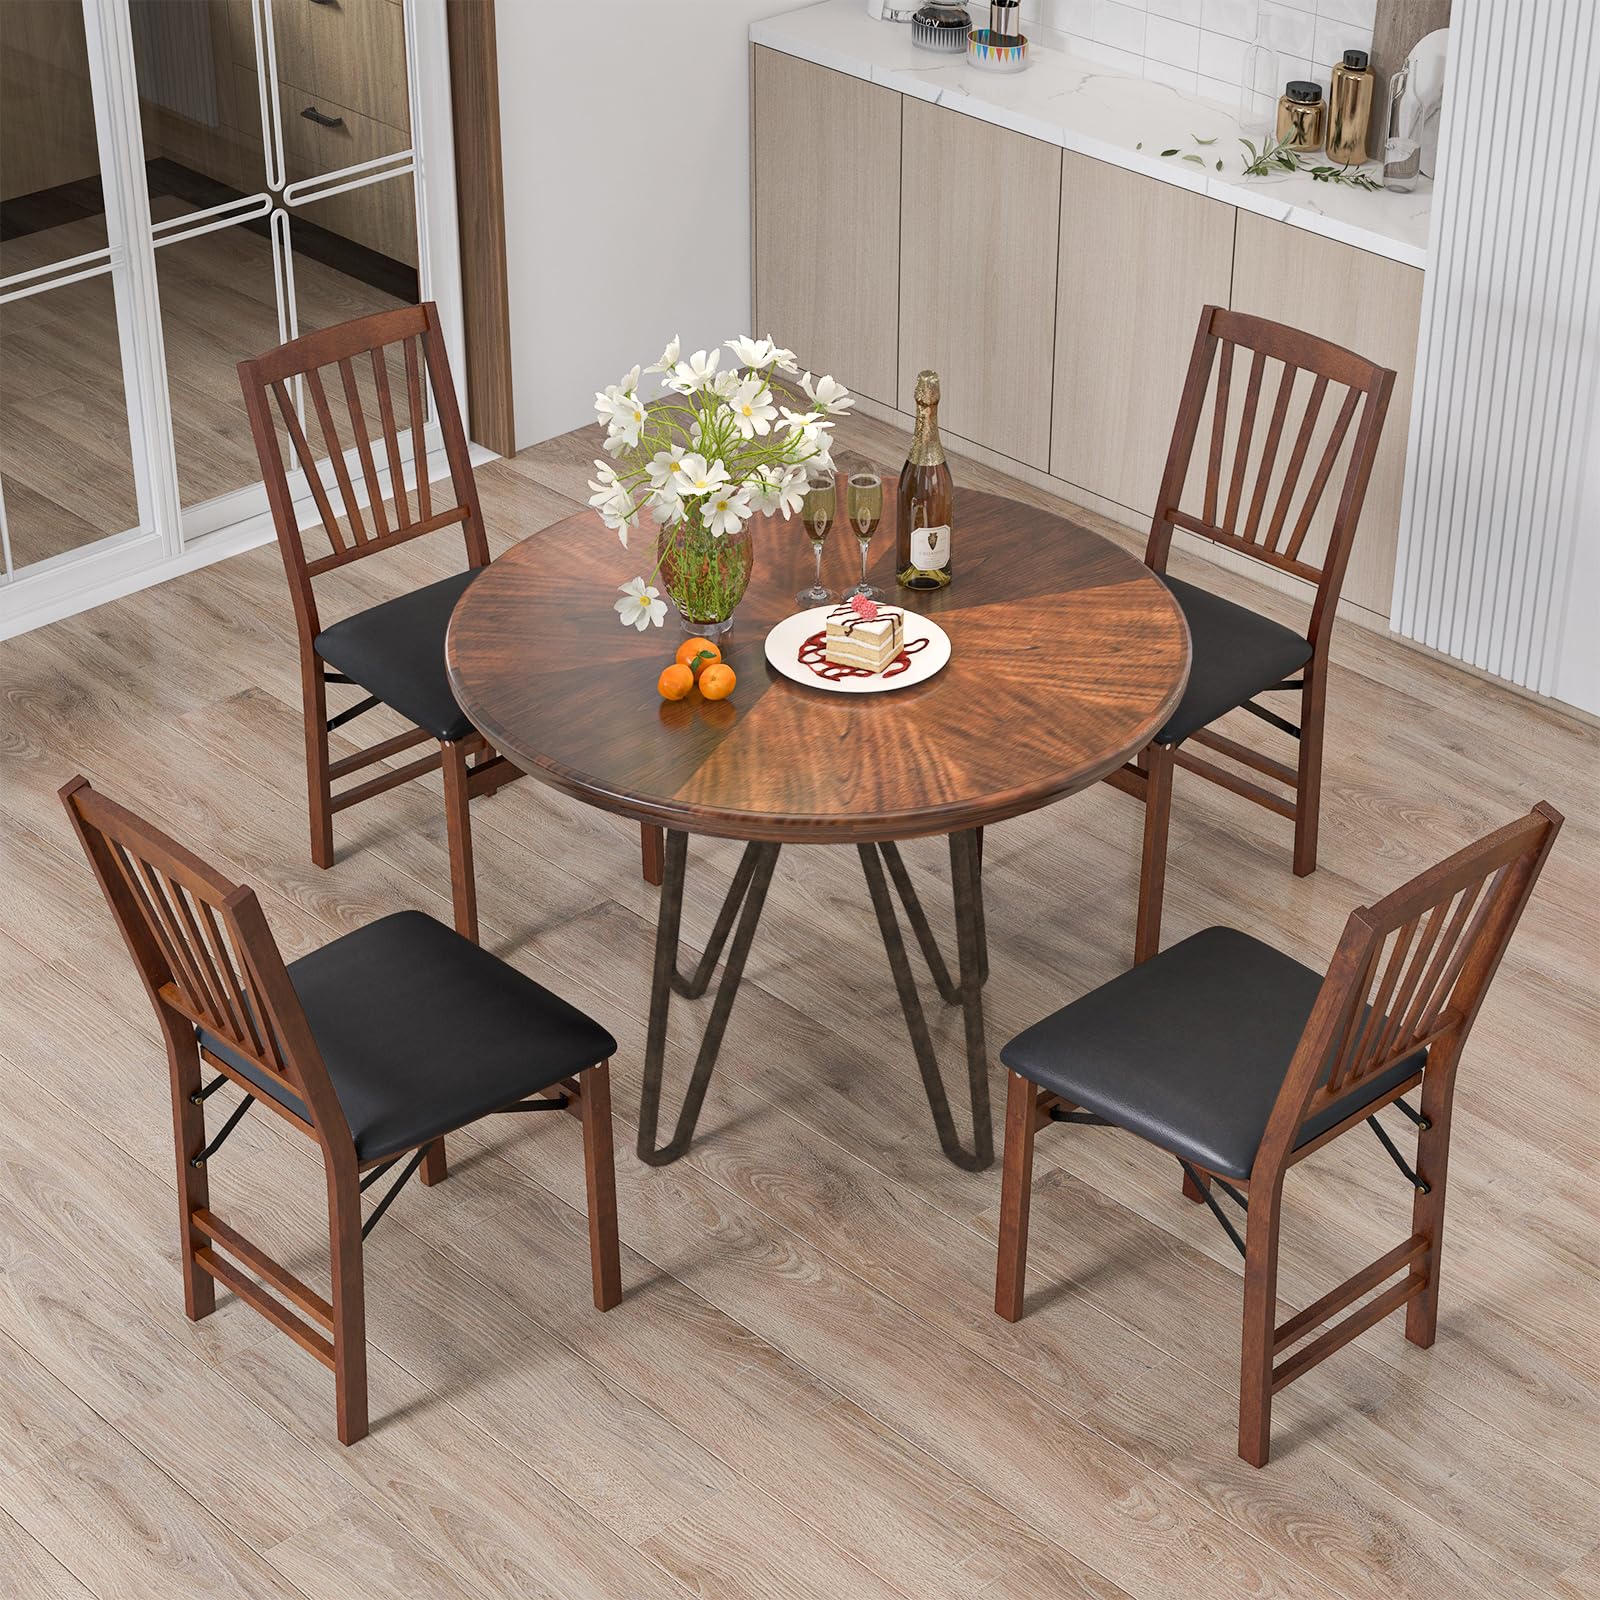 Giantex Folding Dining Chairs Set of 2, Foldable Wood Kitchen Chairs with Padded Seat